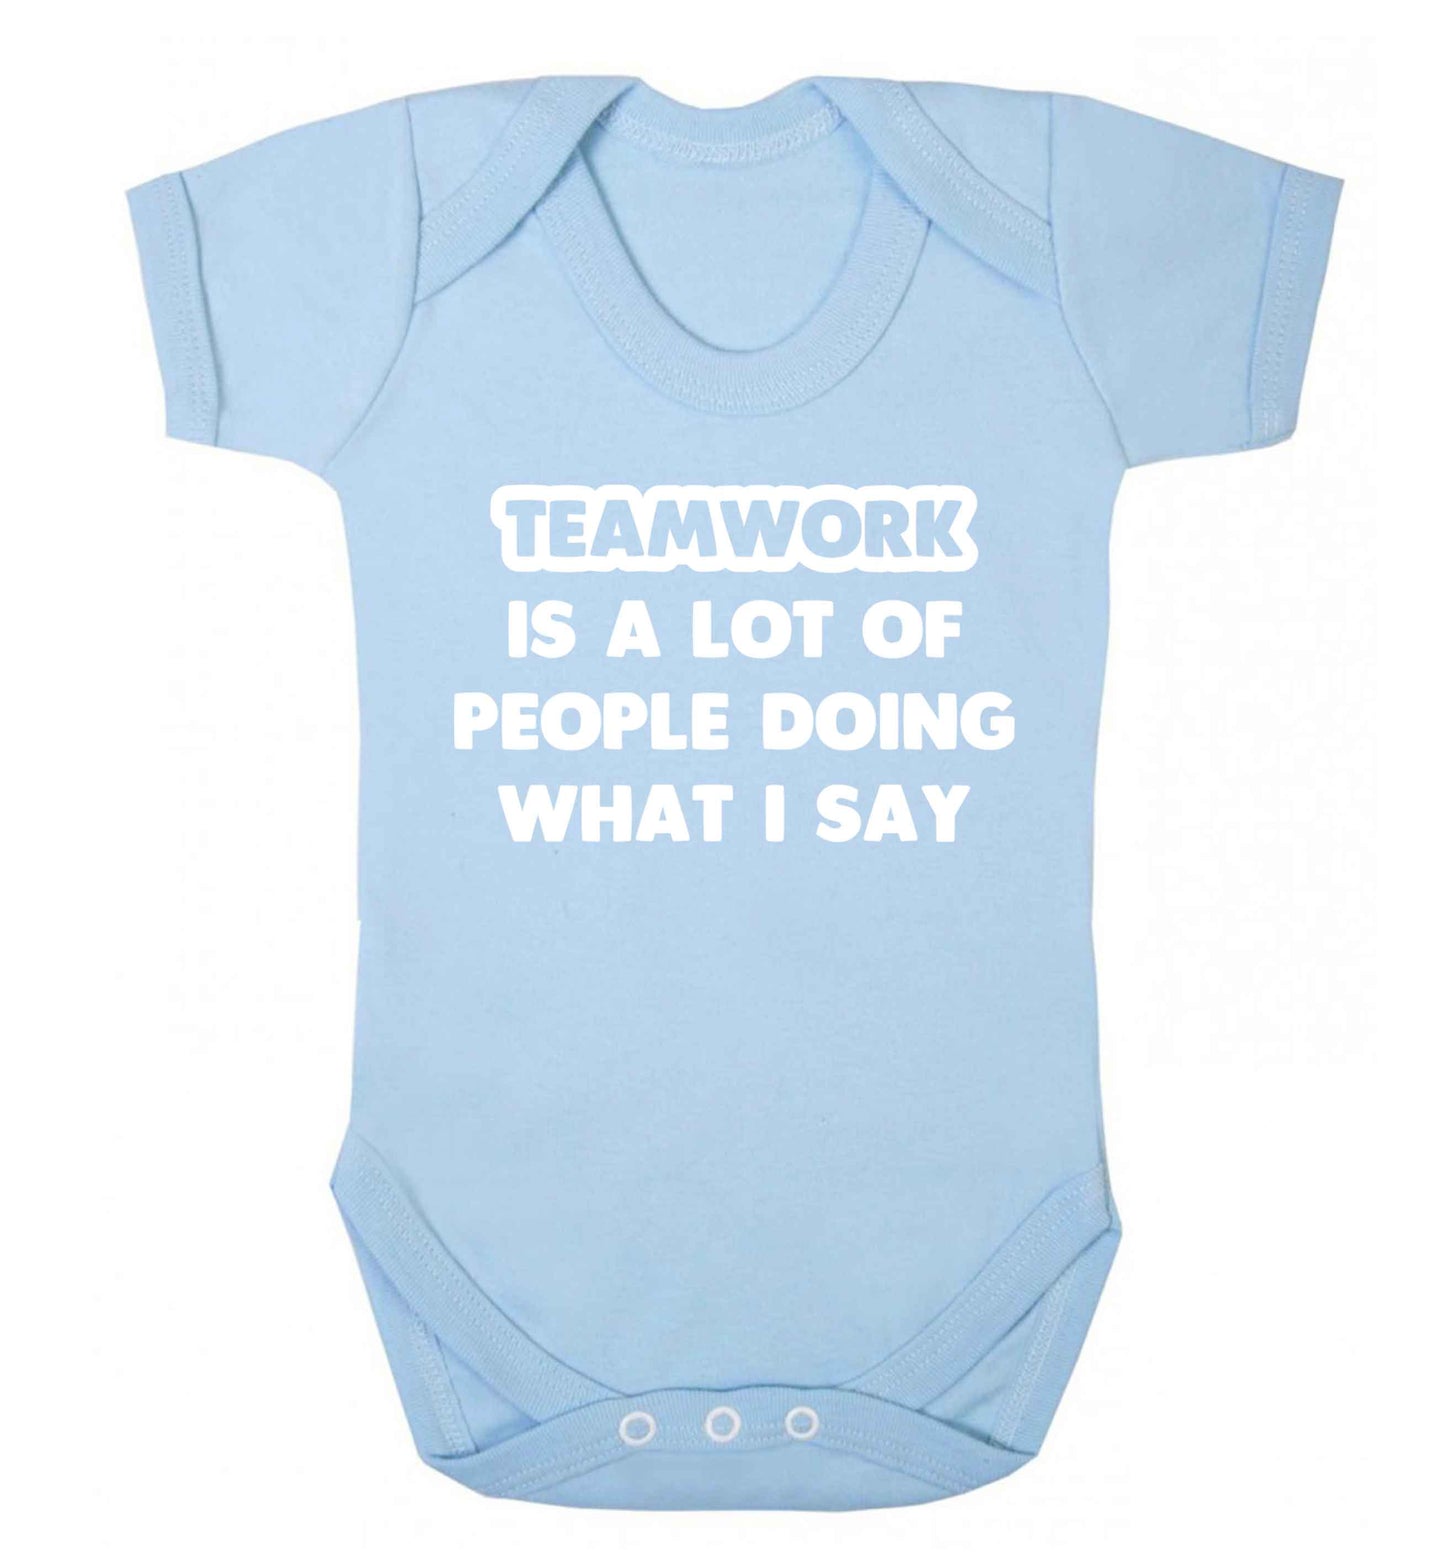 Teamwork is a lot of people doing what I say Baby Vest pale blue 18-24 months